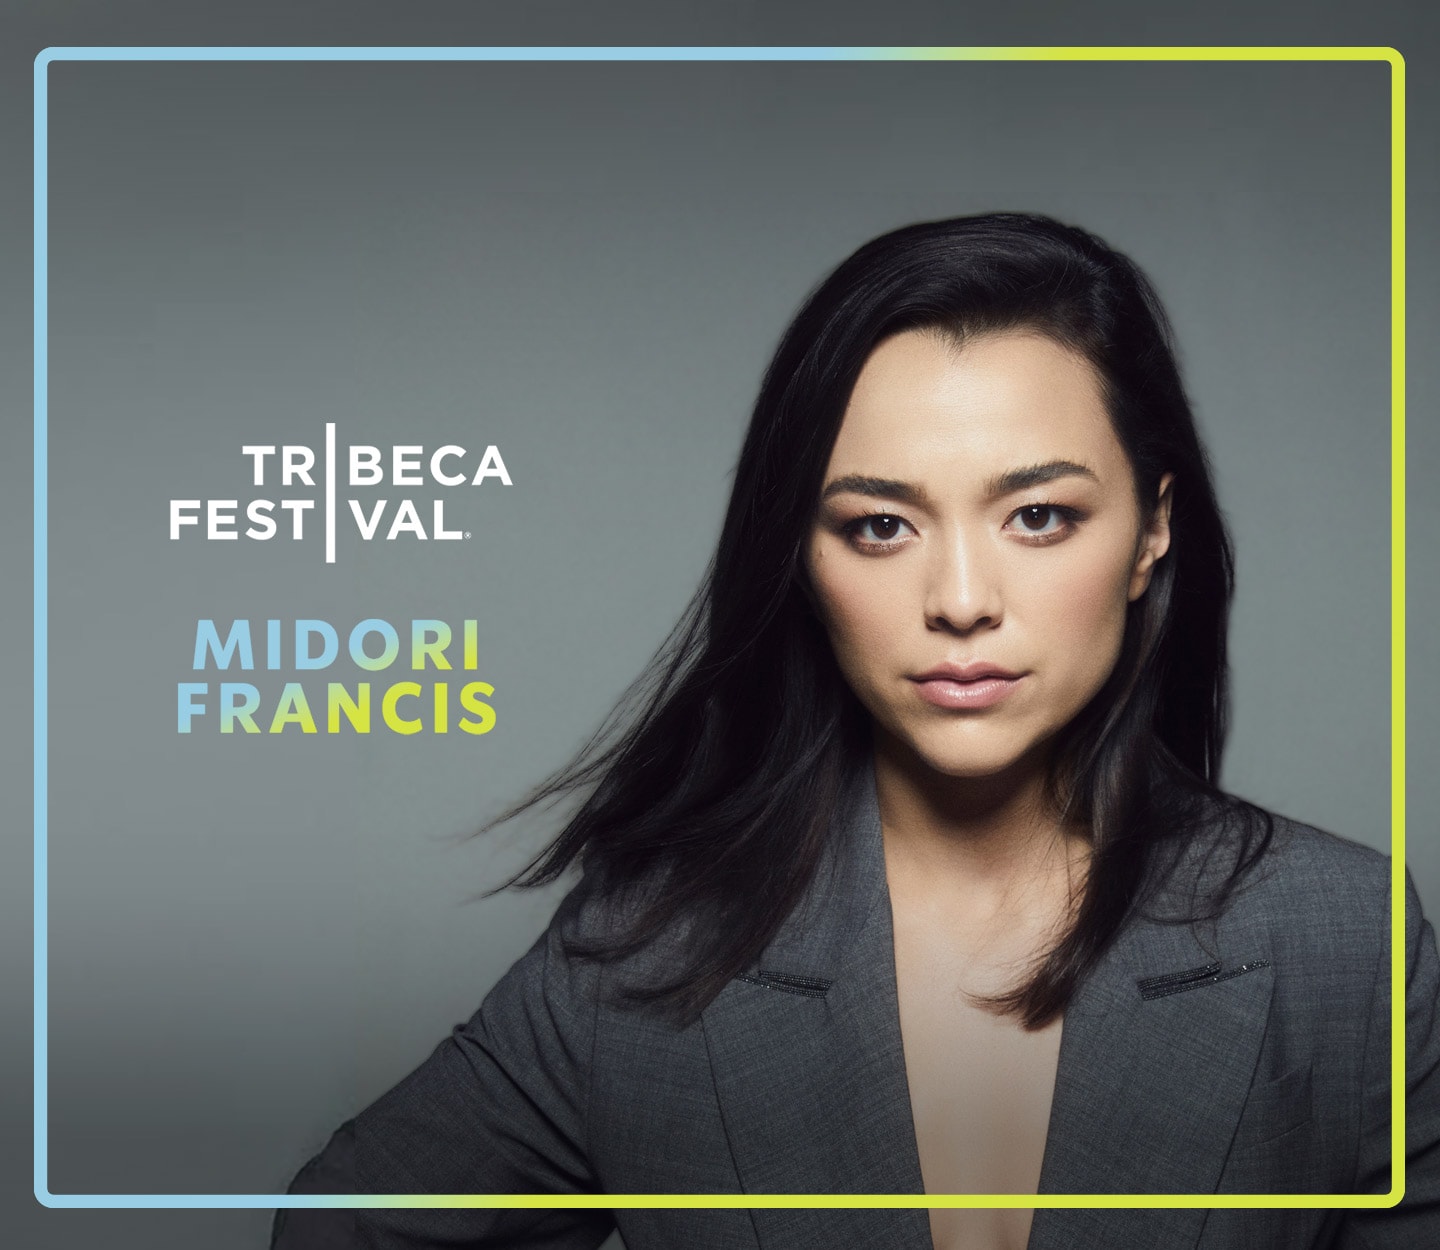 Headshot of actress Midori Francis on a grey background. Text reads "Tribeca Festival"